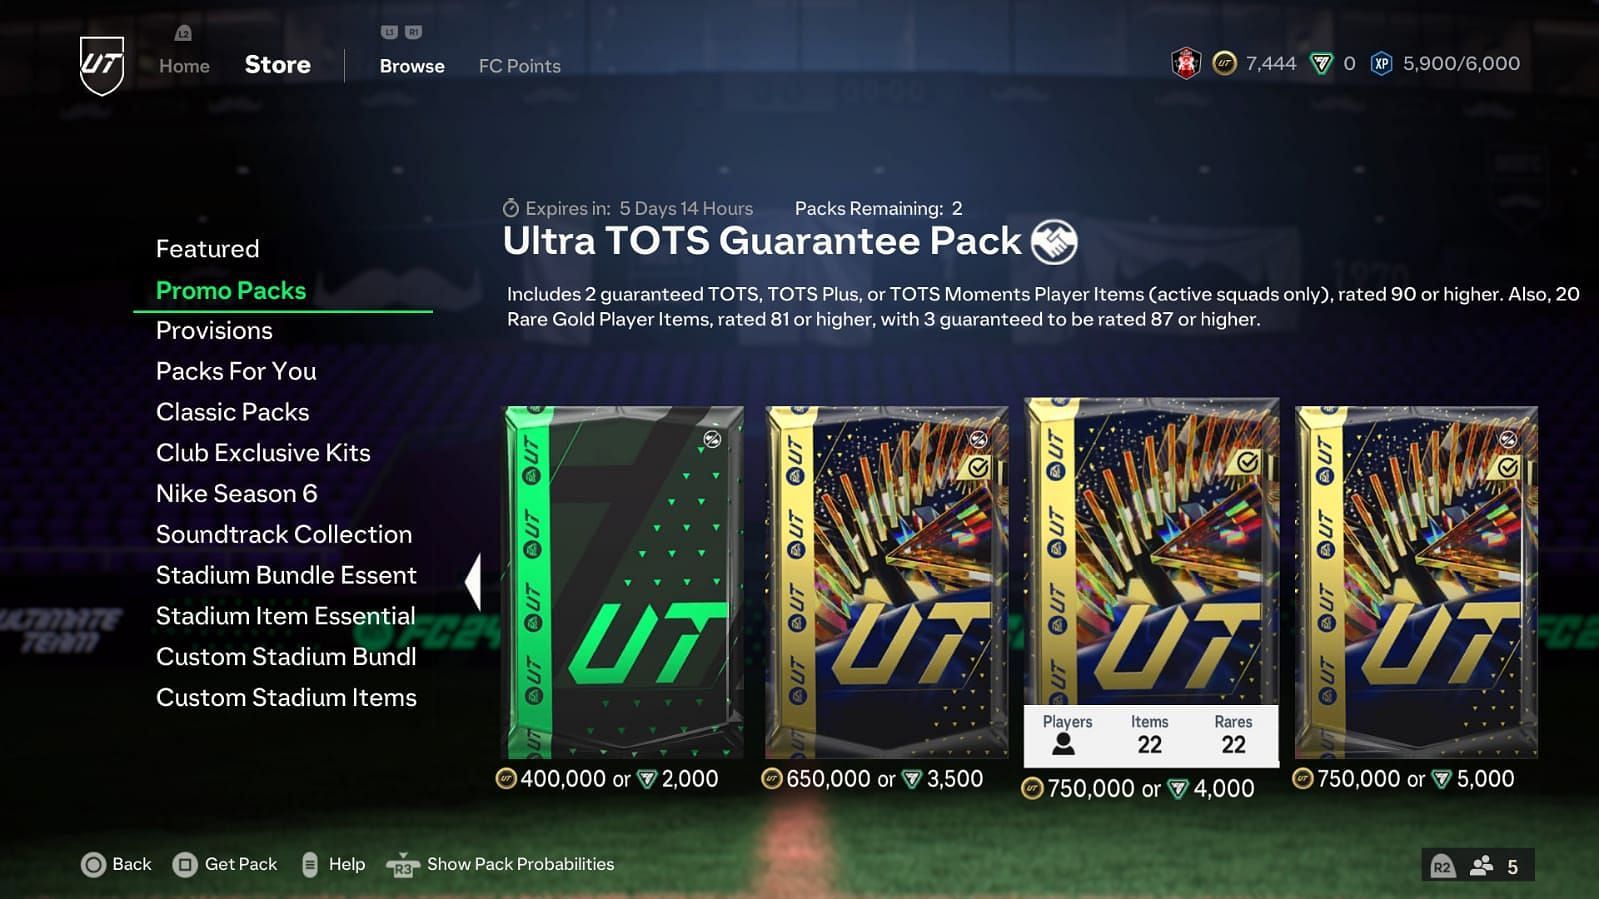 The pack costs 750,000 coins (Image via EA Sports)